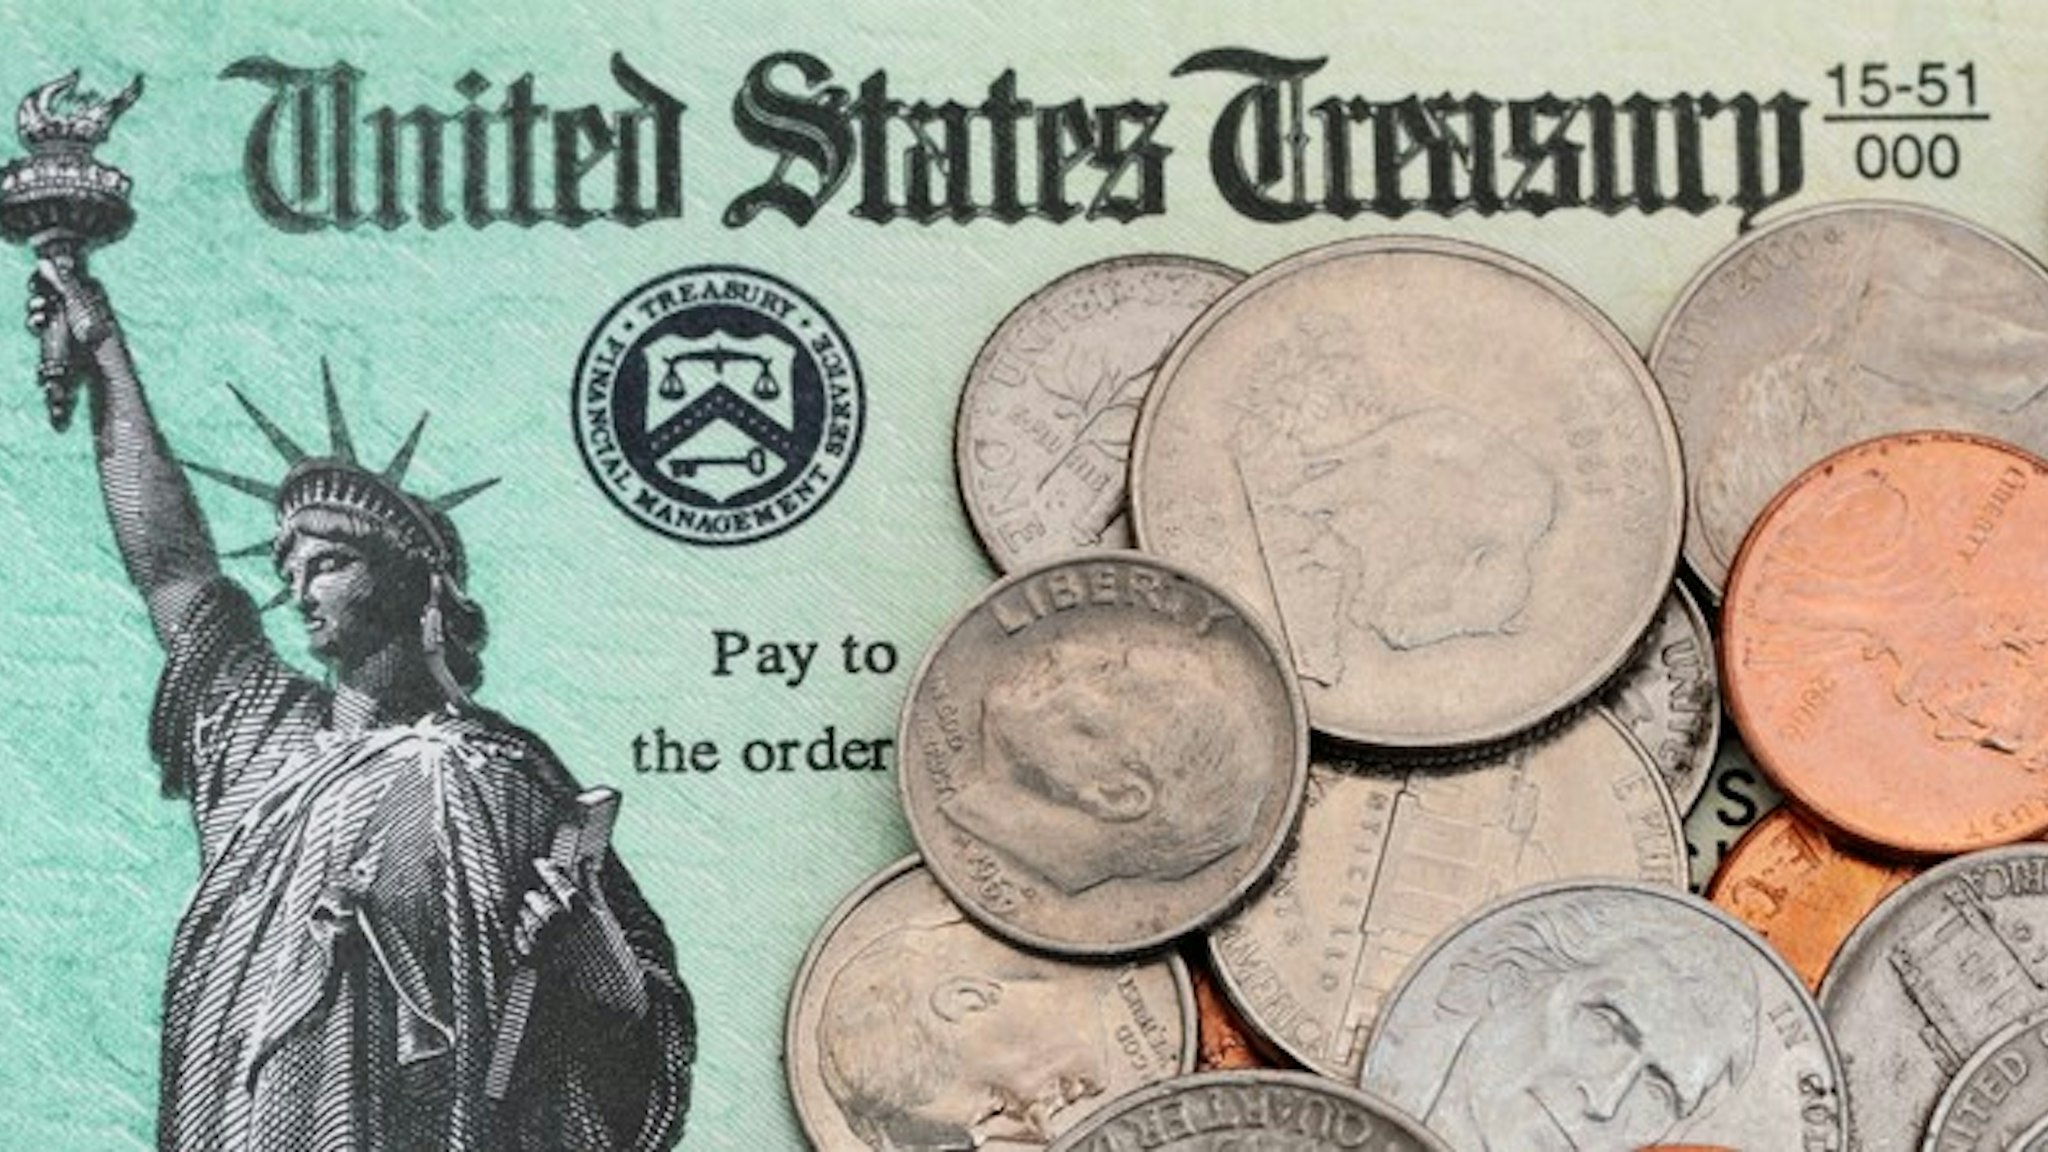 US coins are scattered across an IRS tax refund check